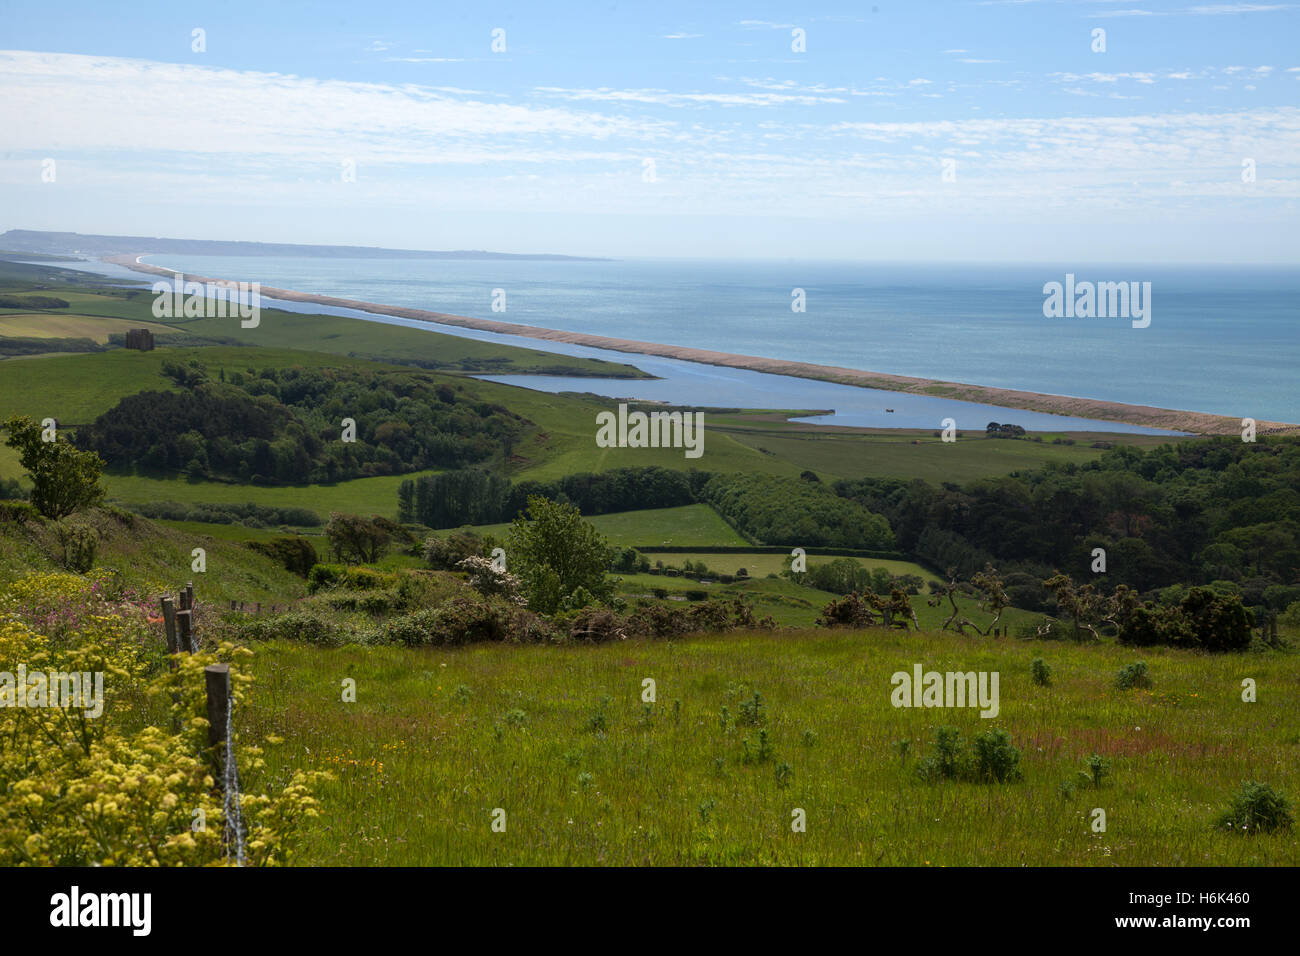 View looking out over Chesil Beach, from the Dorset countryside towards Weymouth. The beach is a World Heritage Site Stock Photo